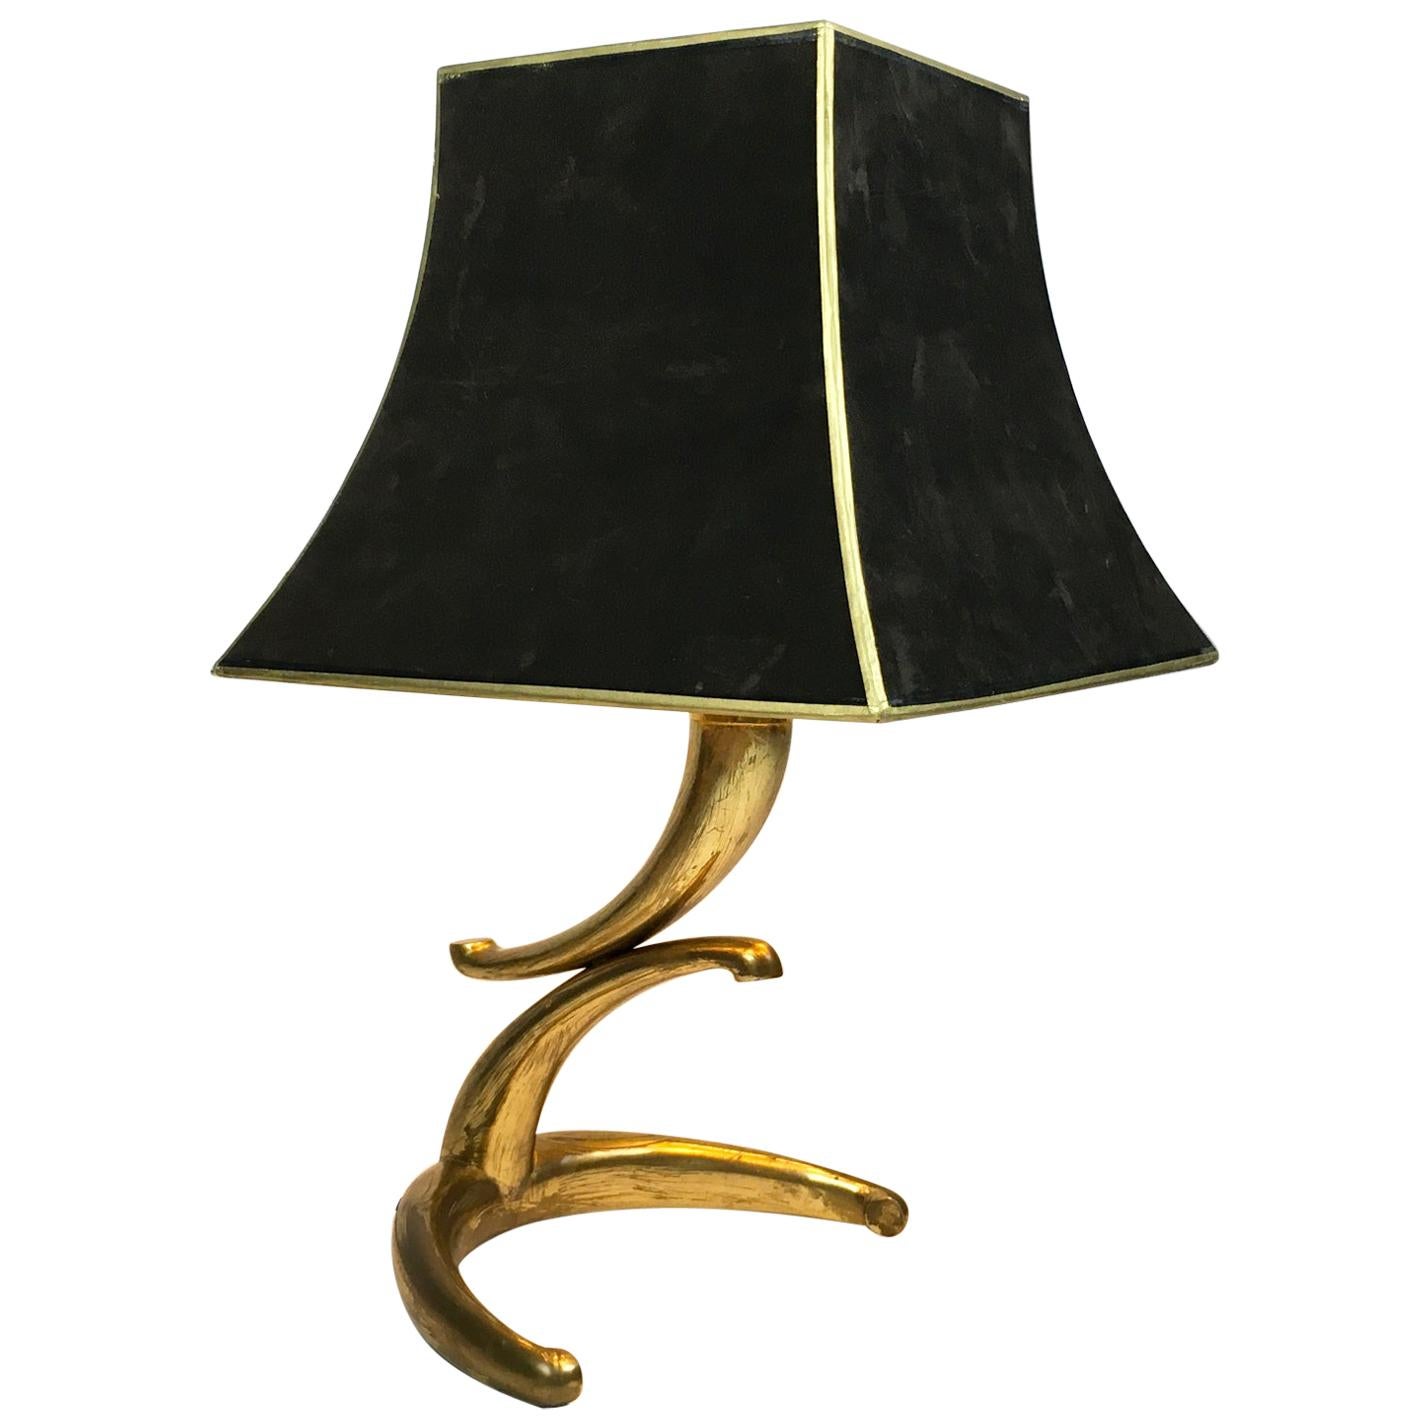 1970s Table Lamp in Solid Brass Horns Shape with Velvet Lampshade, France